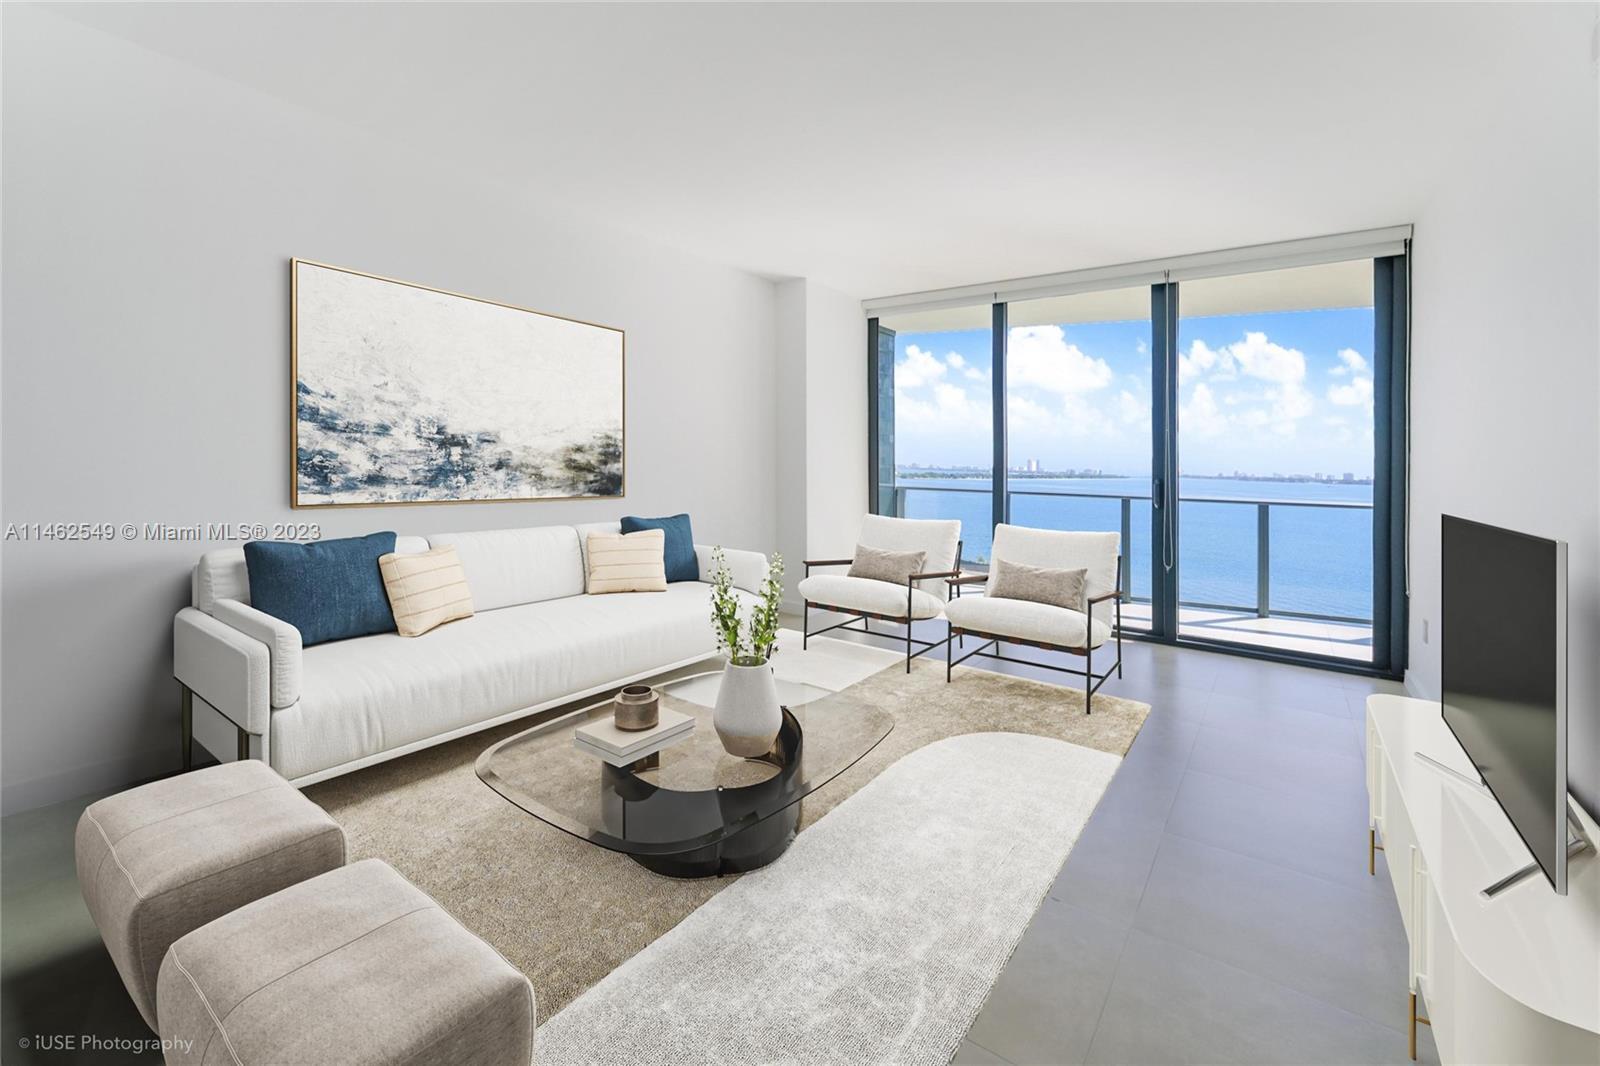 Spectacular Opportunity to won this amazing residence featuring 2 Beds 2 Baths at Icon Bay.
Amazing